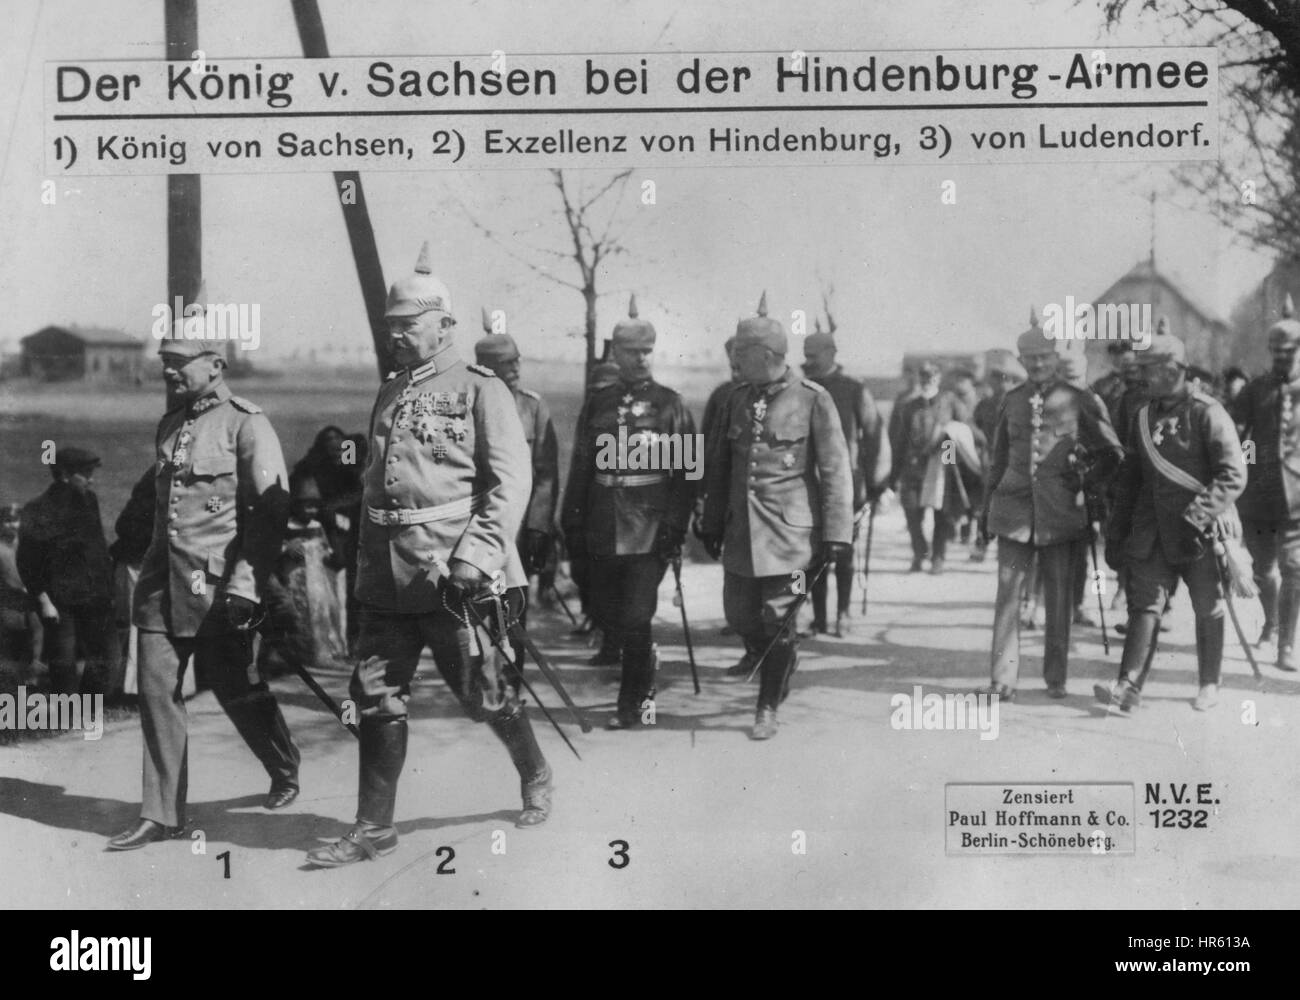 World War I German General von Hindenburg and General von Ludendorf walking with the King of Saxony and German soldiers, 1915. From the New York Public Library. Stock Photo